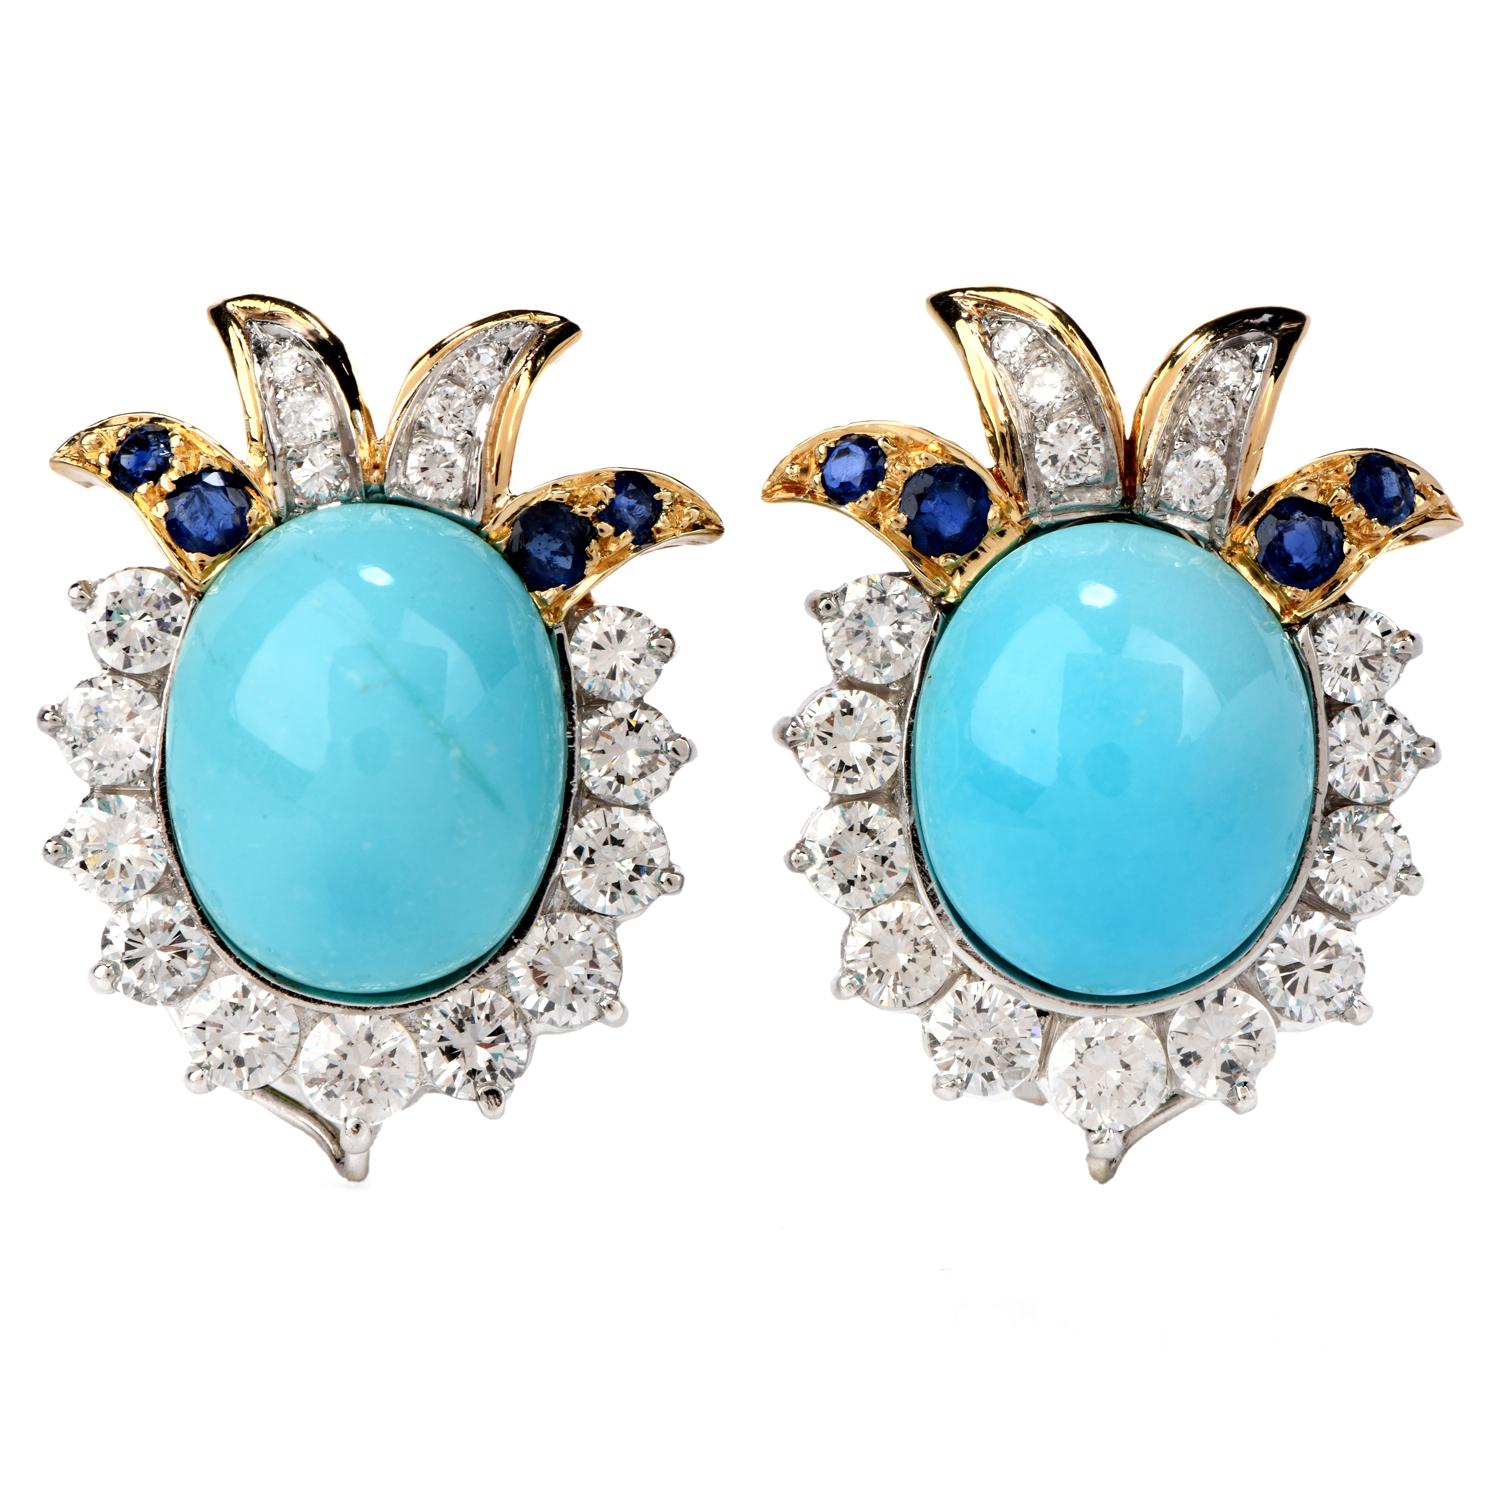 Be the belle of the ball with this extraordinary Estate Diamond Turquoise And Sapphire 18K Gold Day & Night Earrings. 
These earrings are crafted in 18 karat white and yellow gold.  There are 4 genuine turquoise, two in oval cabochon and two in pear